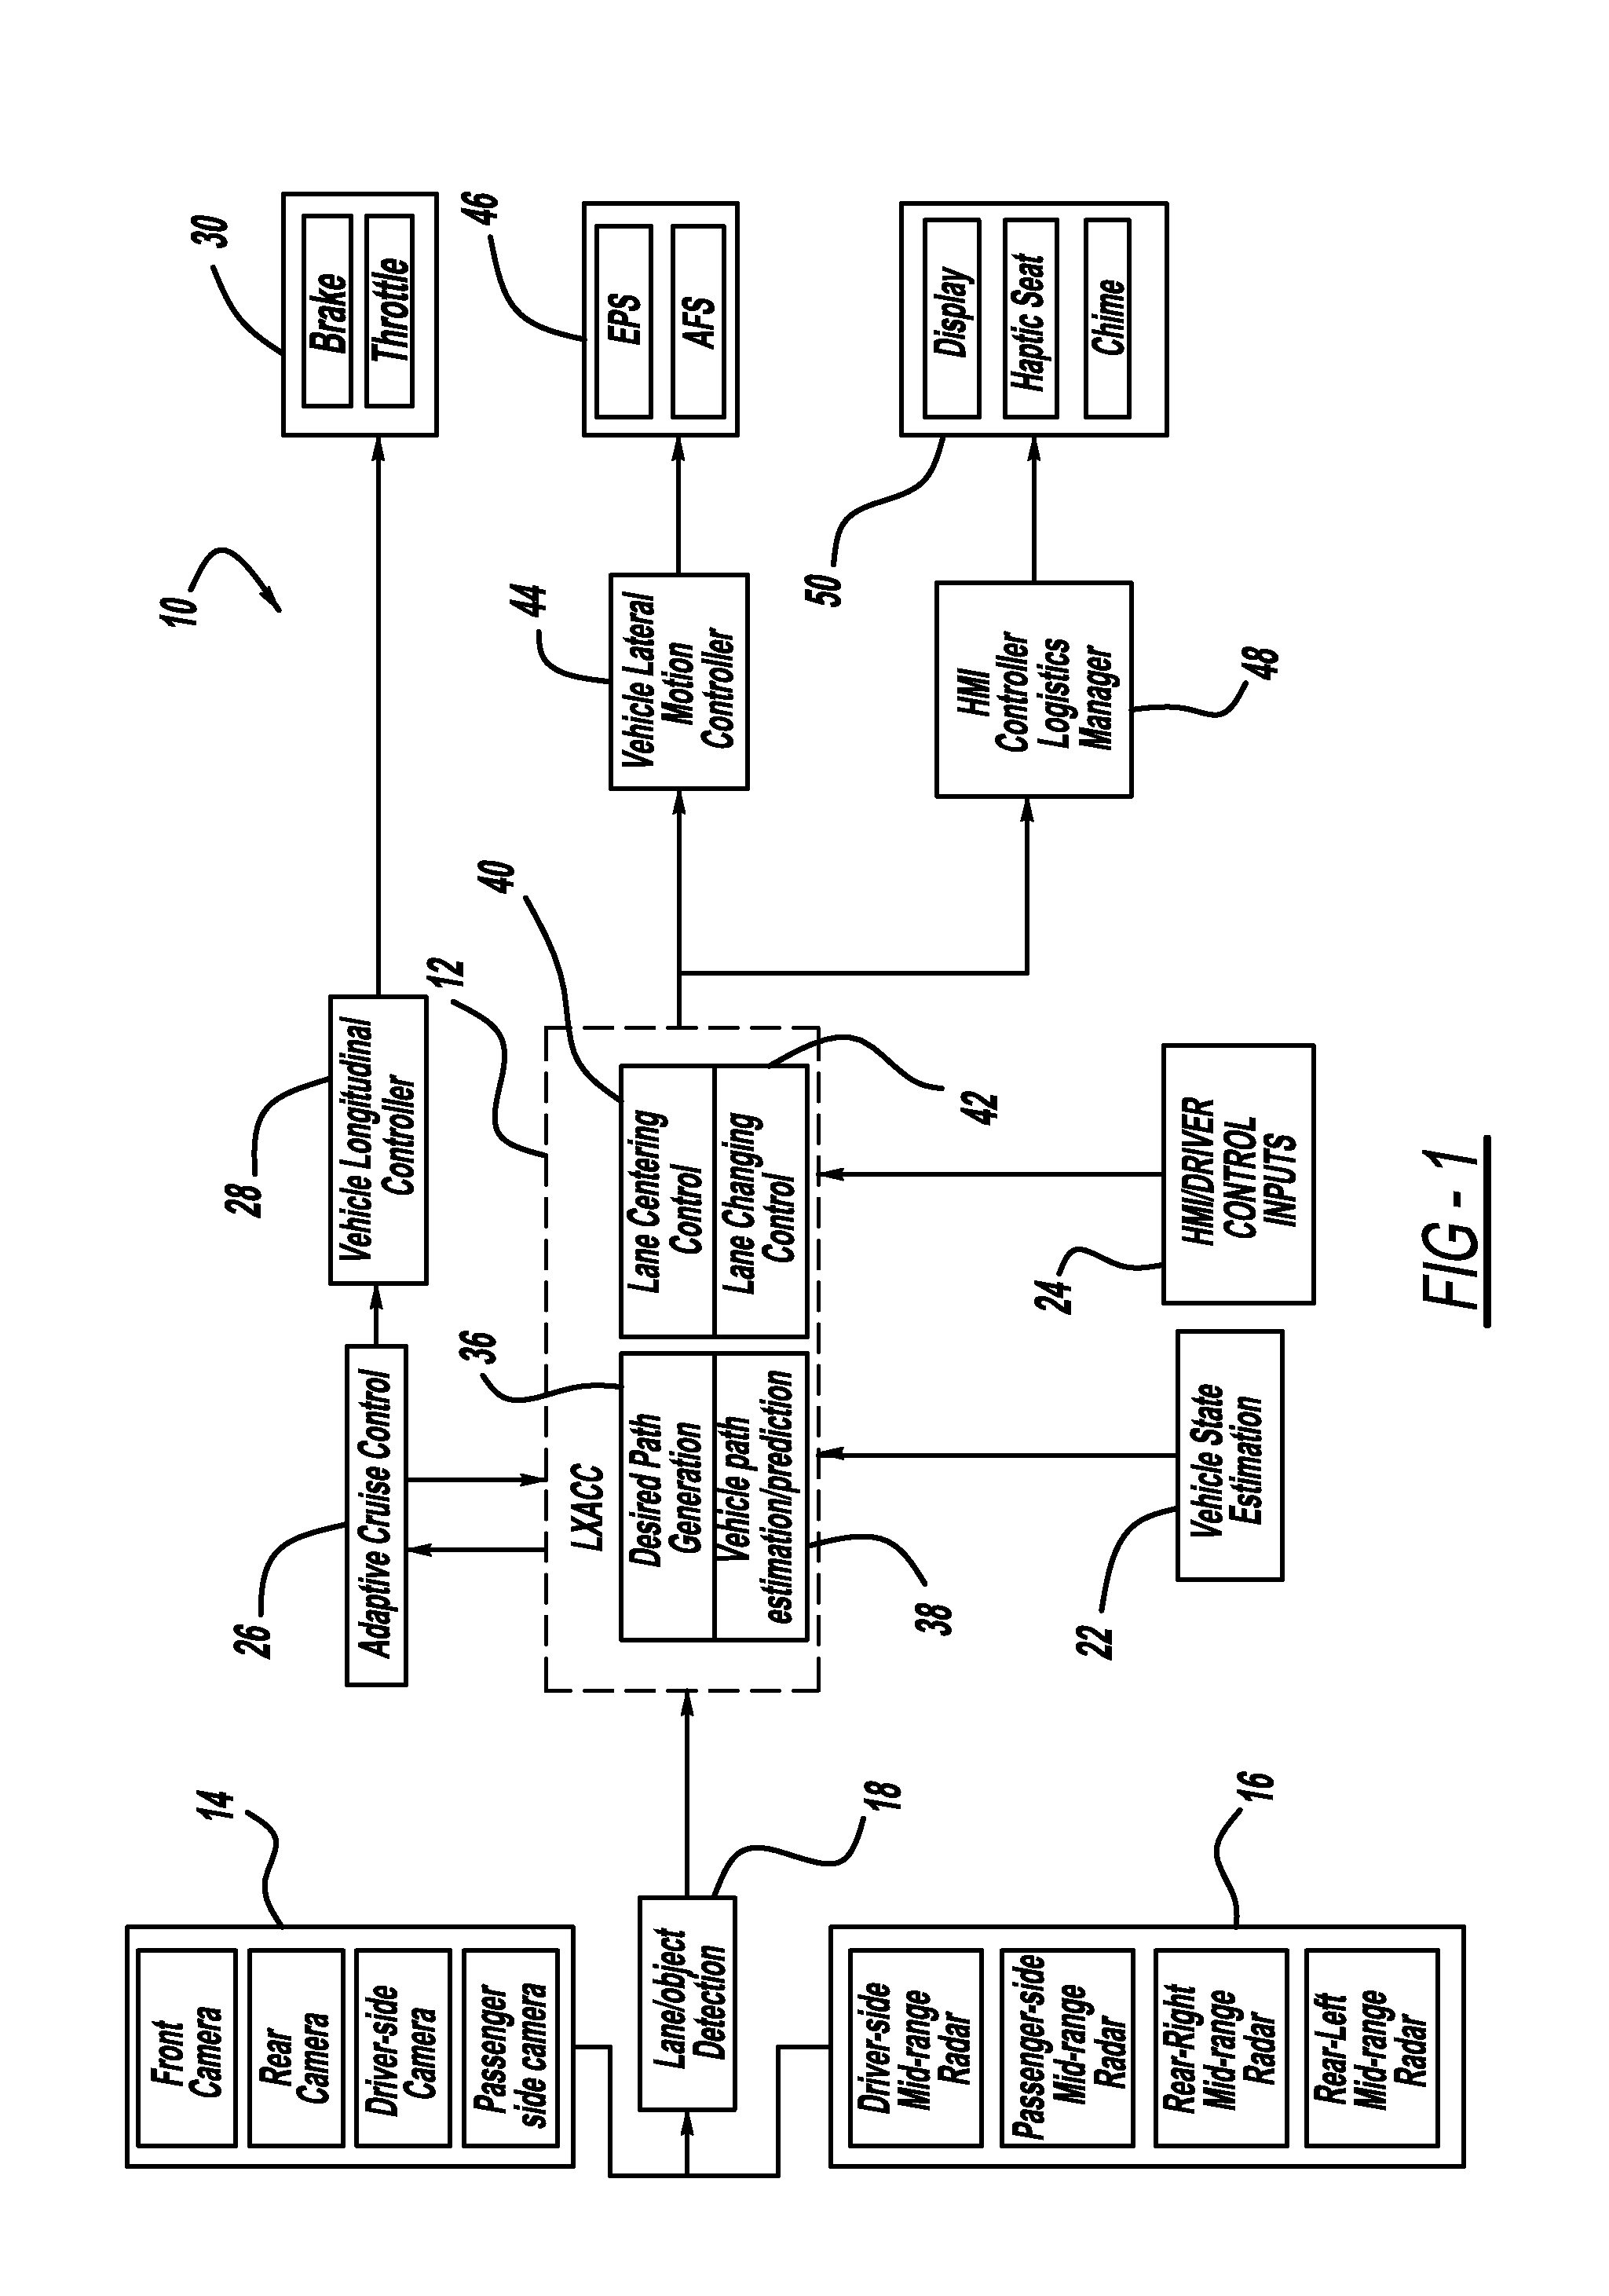 Path generation algorithm for automated lane centering and lane changing control system